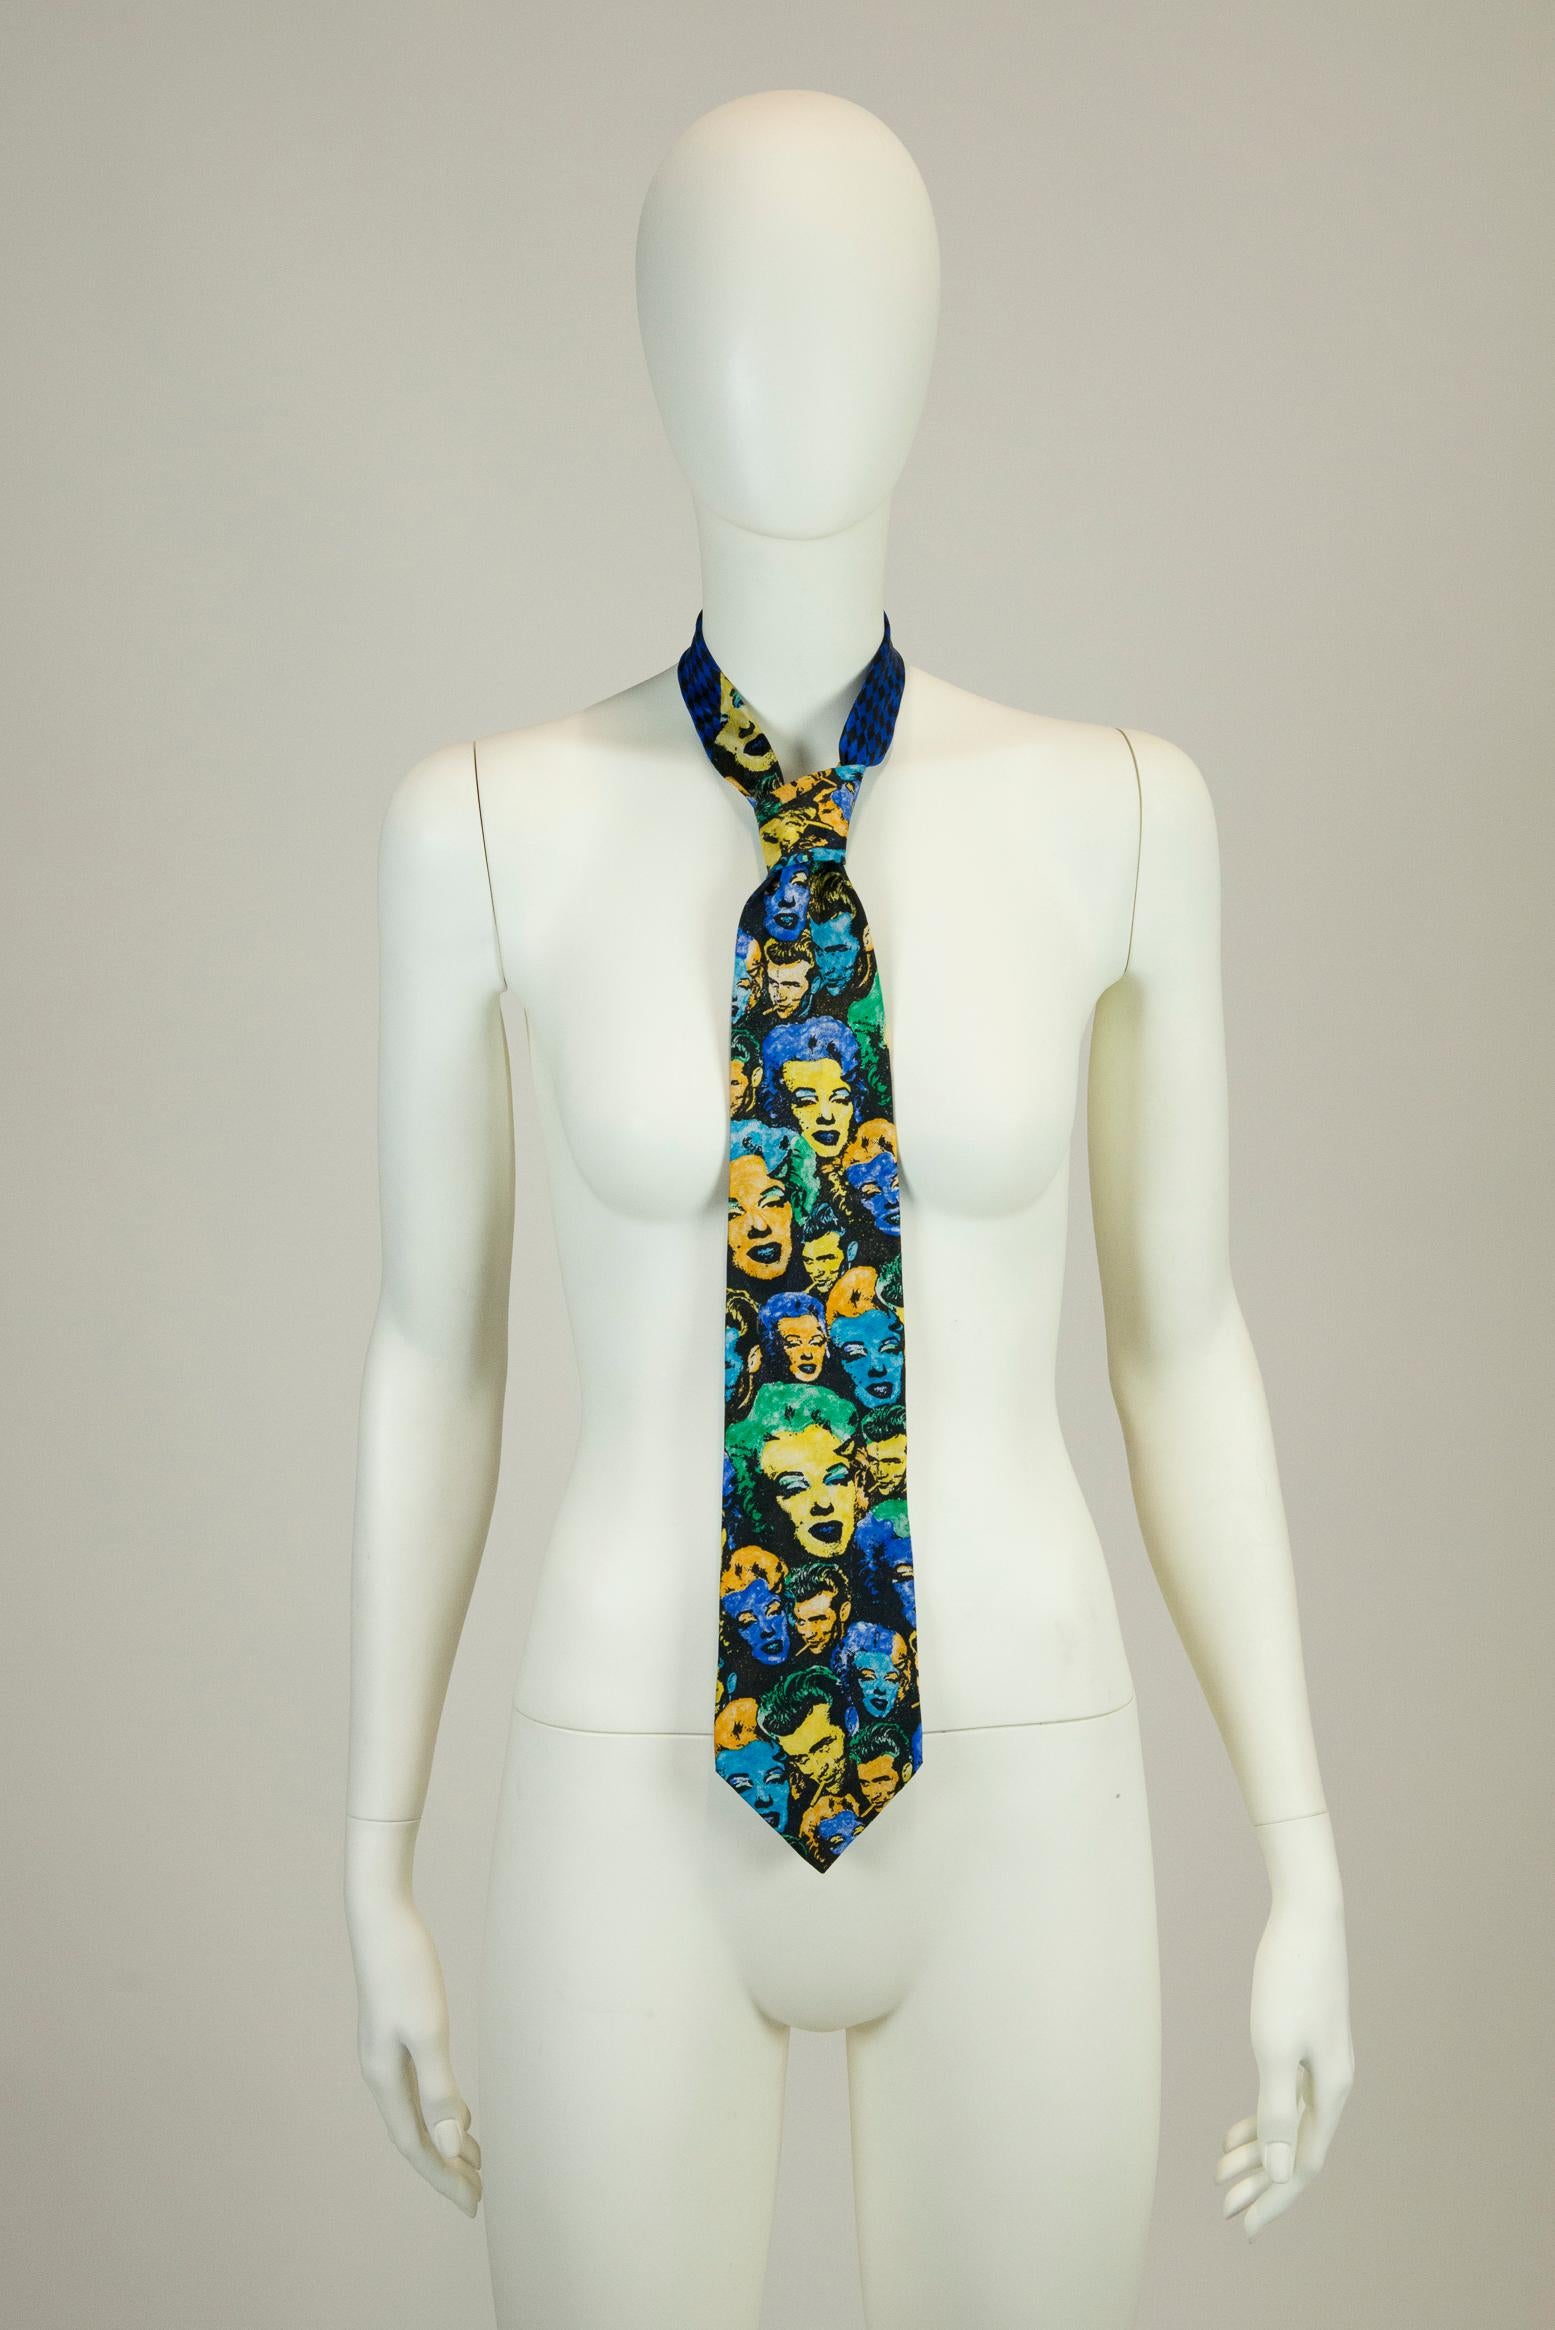 Gianni Versace Marilyn & James Dean Print Silk Neck Tie In Excellent Condition For Sale In Geneva, CH